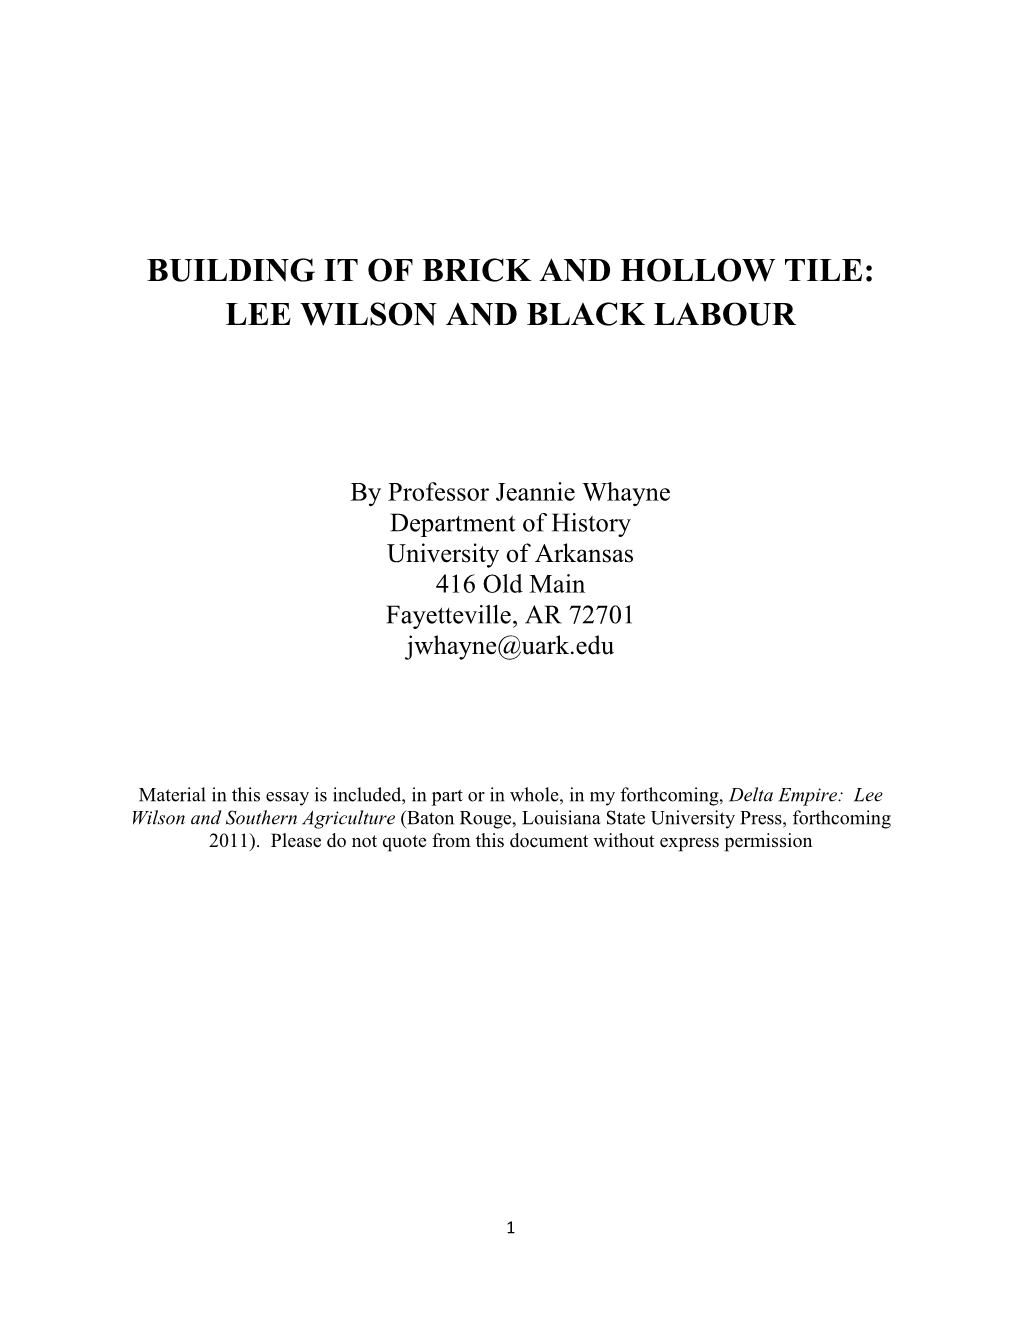 Lee Wilson and Black Labour